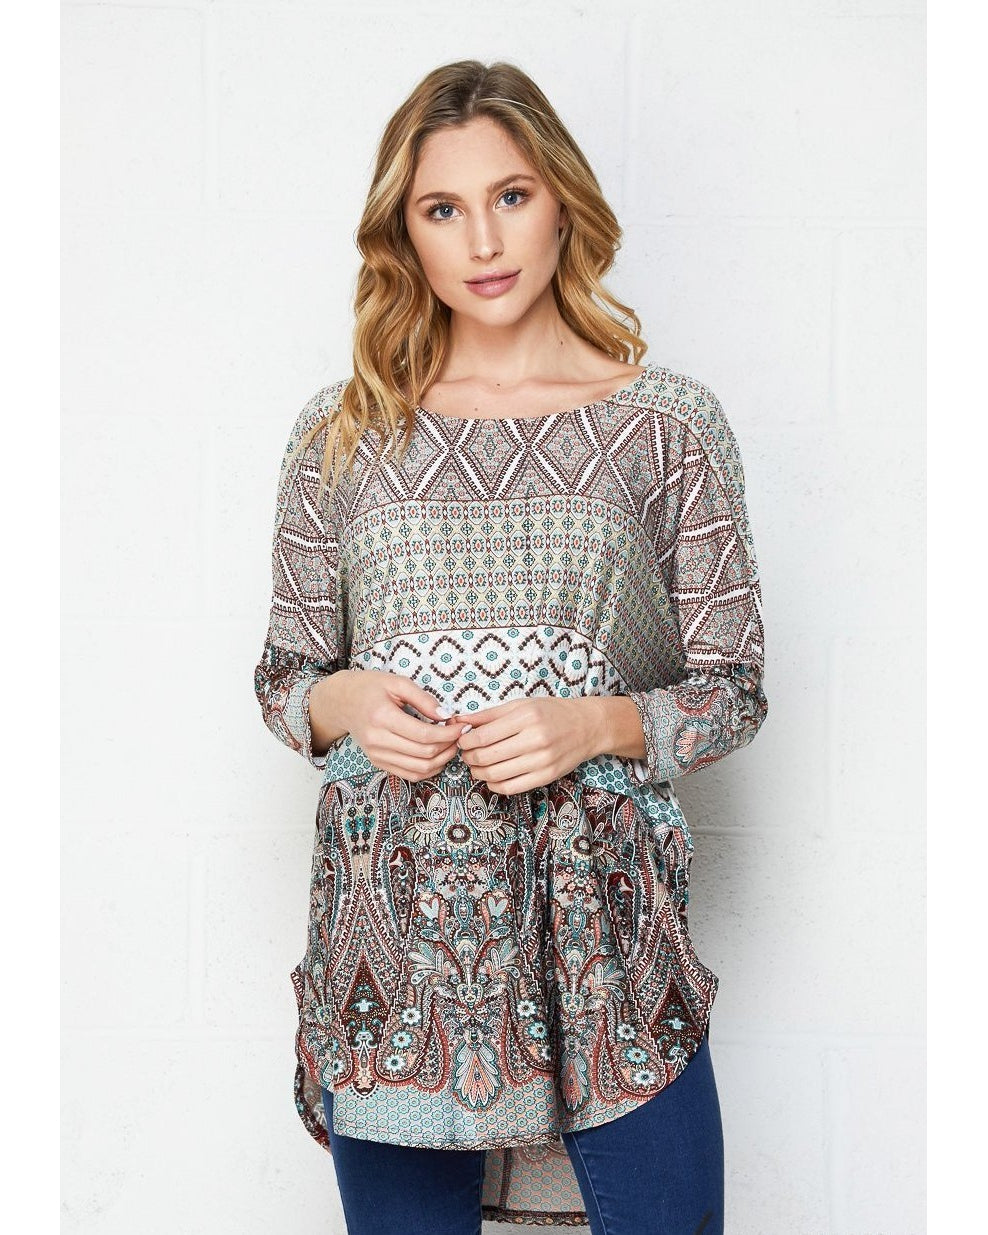 Out Of Sight Print Dolman Top with 3/4 Sleeves - Essentially Elegant 